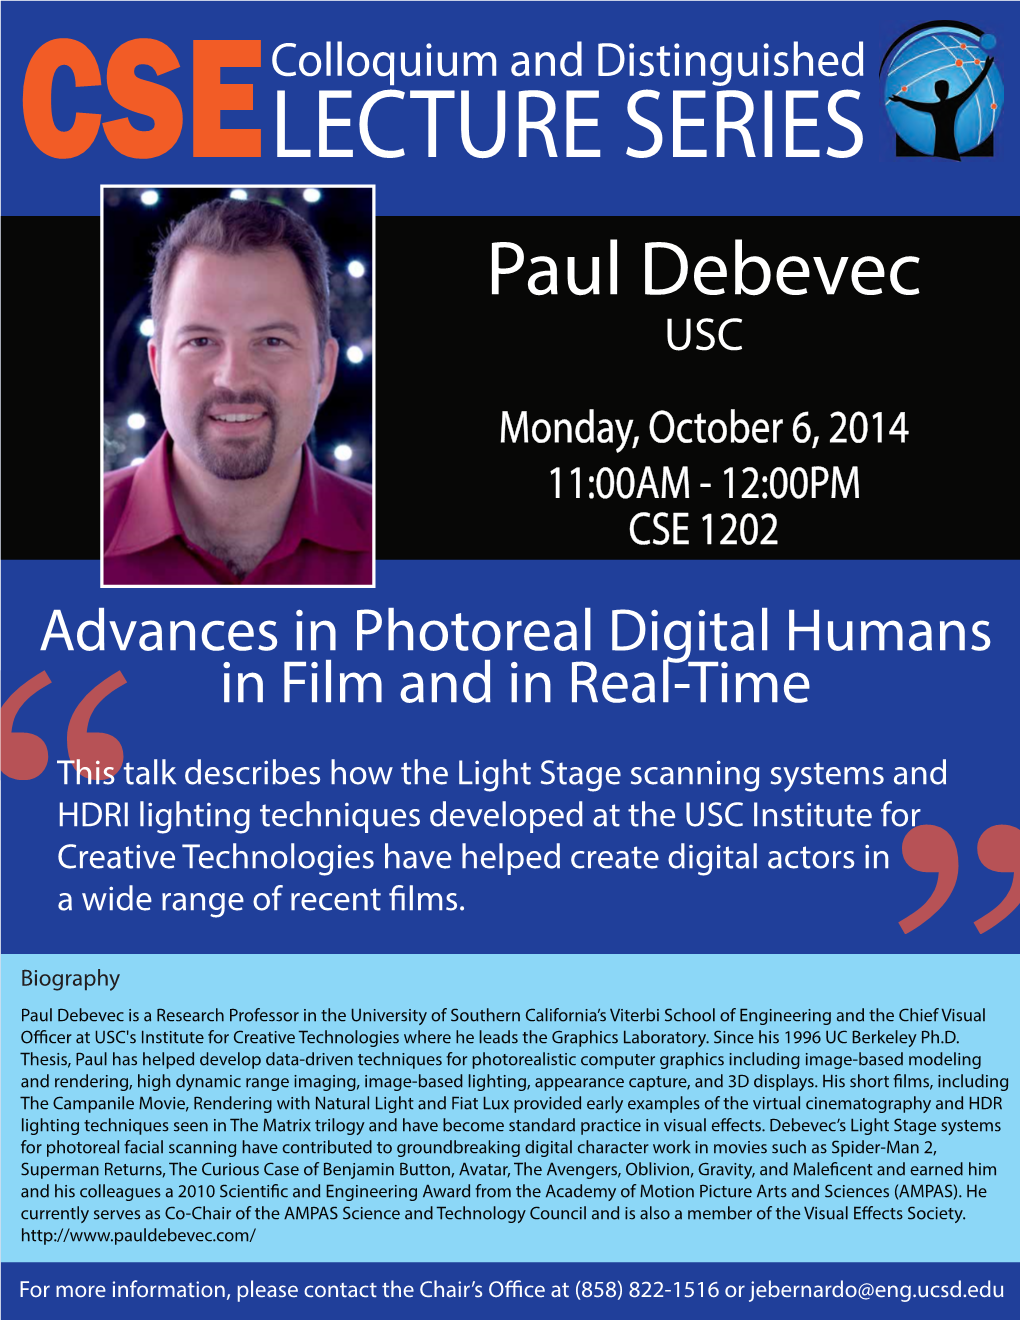 LECTURE SERIES Paul Debevec USC Monday, October 6, 2014 11:00AM - 12:00PM CSE 1202 Advances in Photoreal Digital Humans in Film and in Real-Time